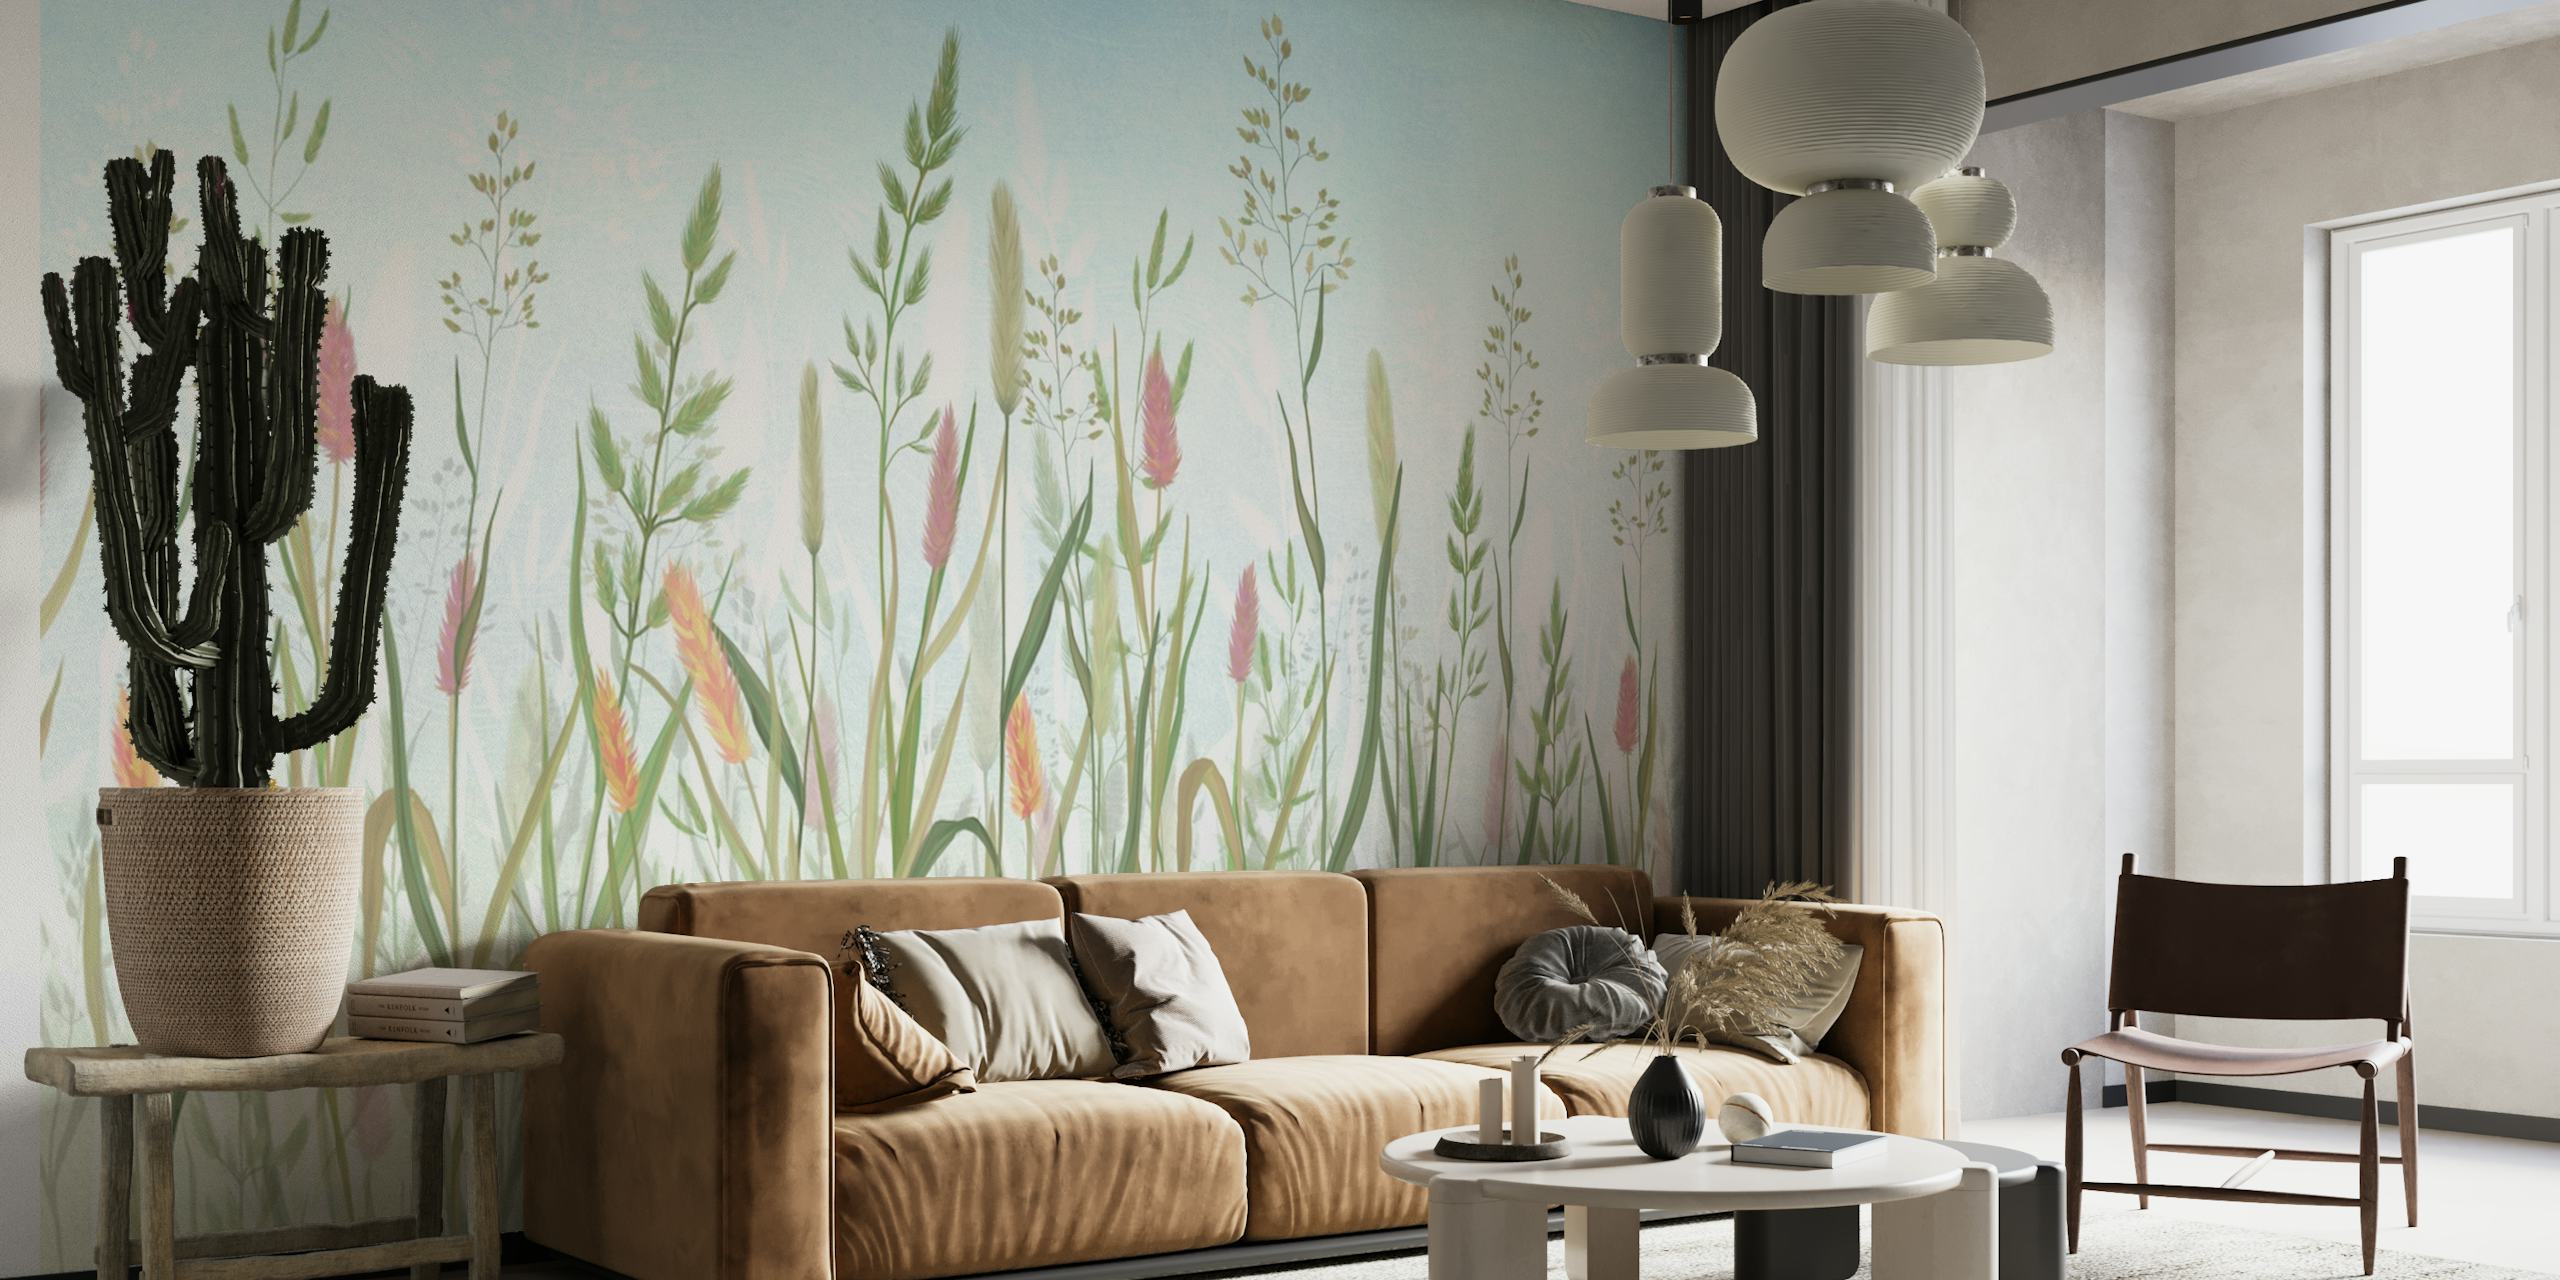 Pastel-toned meadow grass wall mural with a serene wildflower design